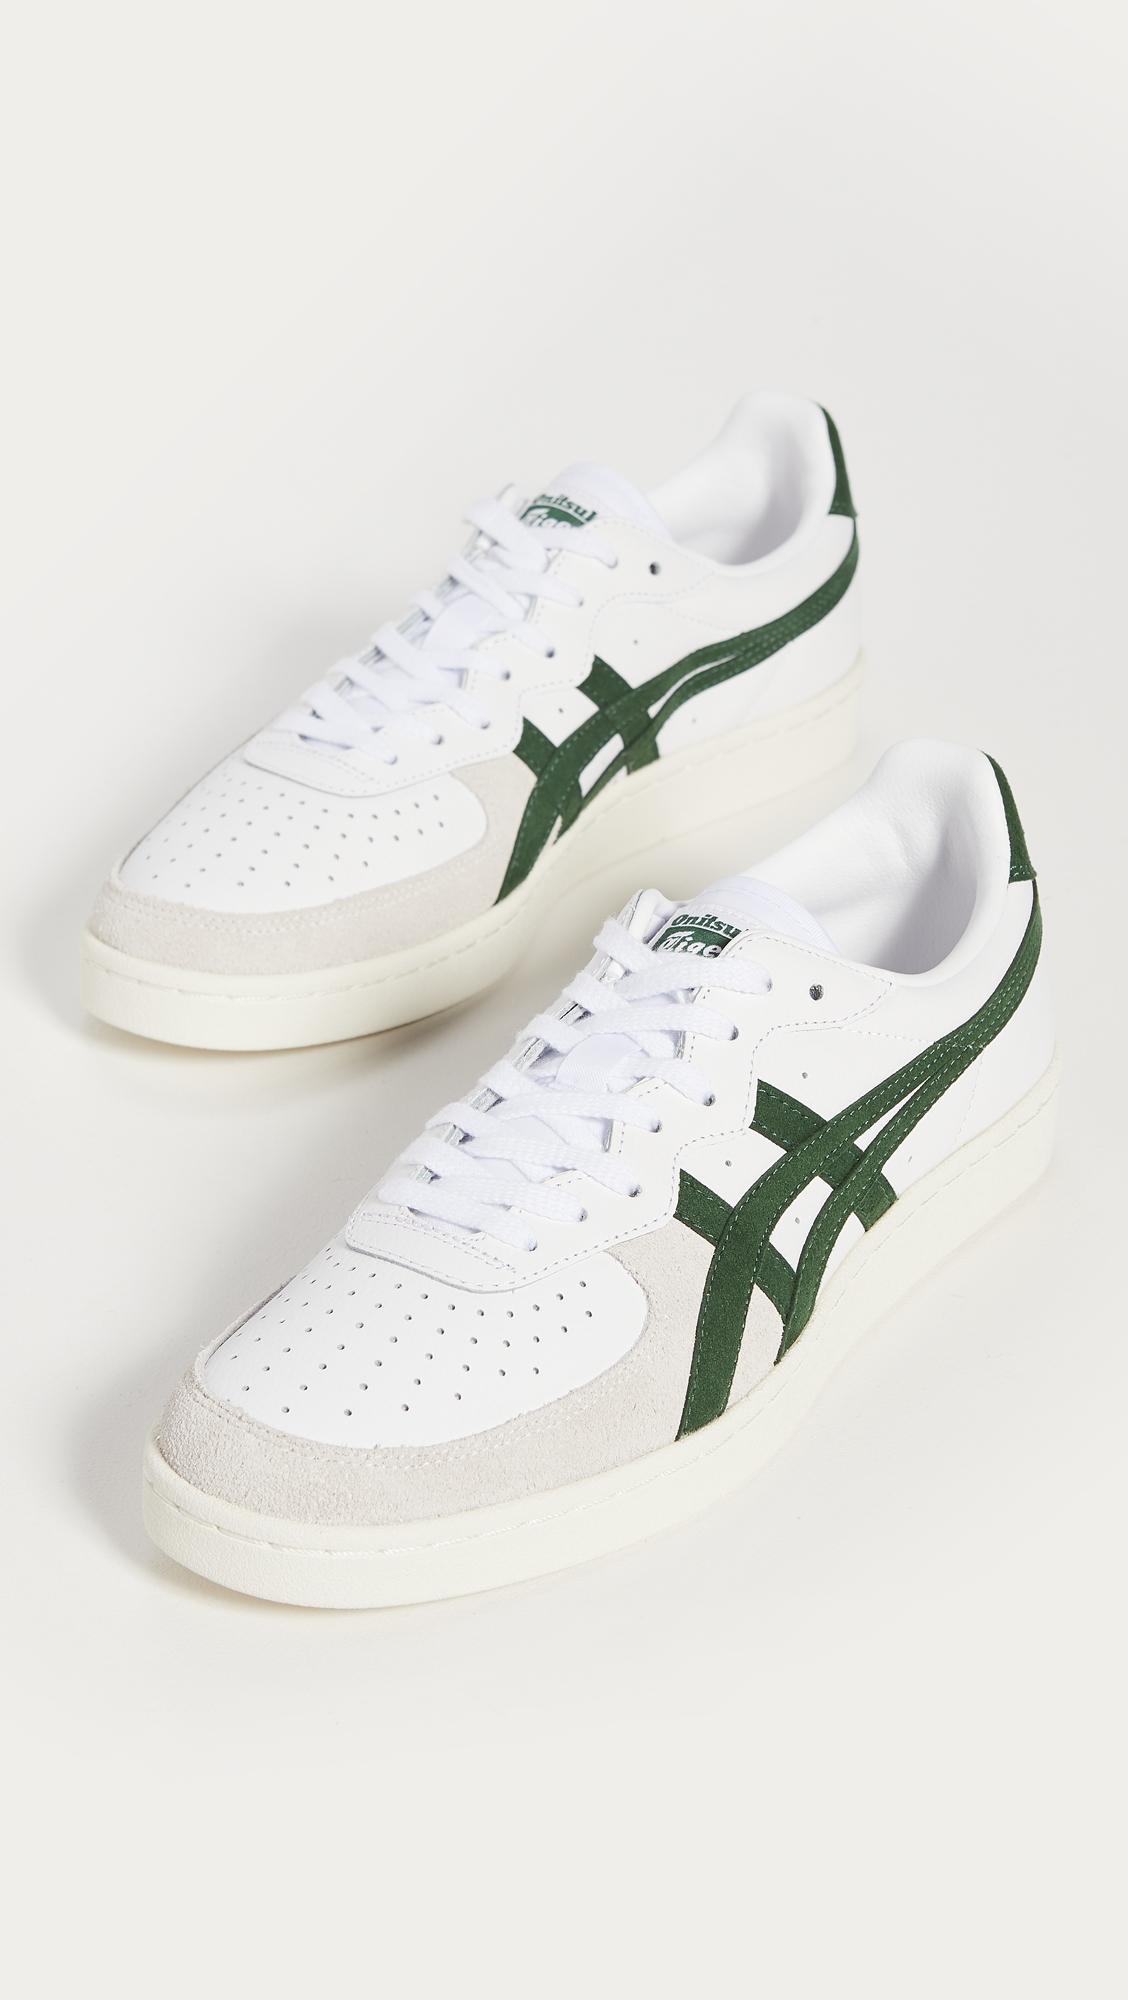 Onitsuka Tiger Leather Gsm Sneakers in Green for Men - Lyst